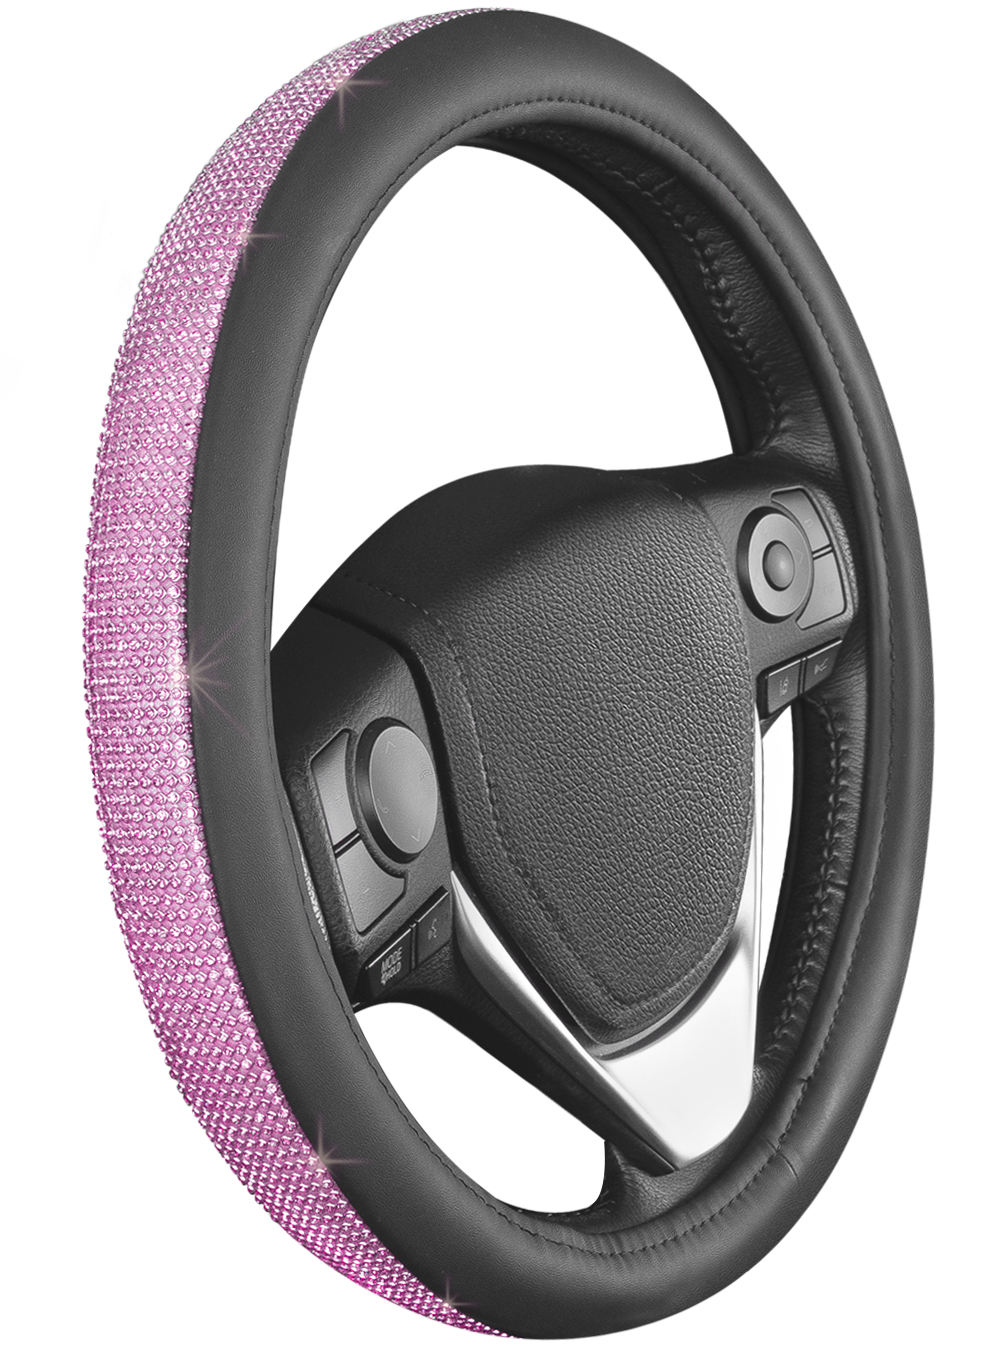 BDK Bling Bling Diamond Leather Steering Wheel Cover with Rows Crystal  Rhinestones, Universal Fit 14.5-15.5 Inch for Women Girls (Pink) 